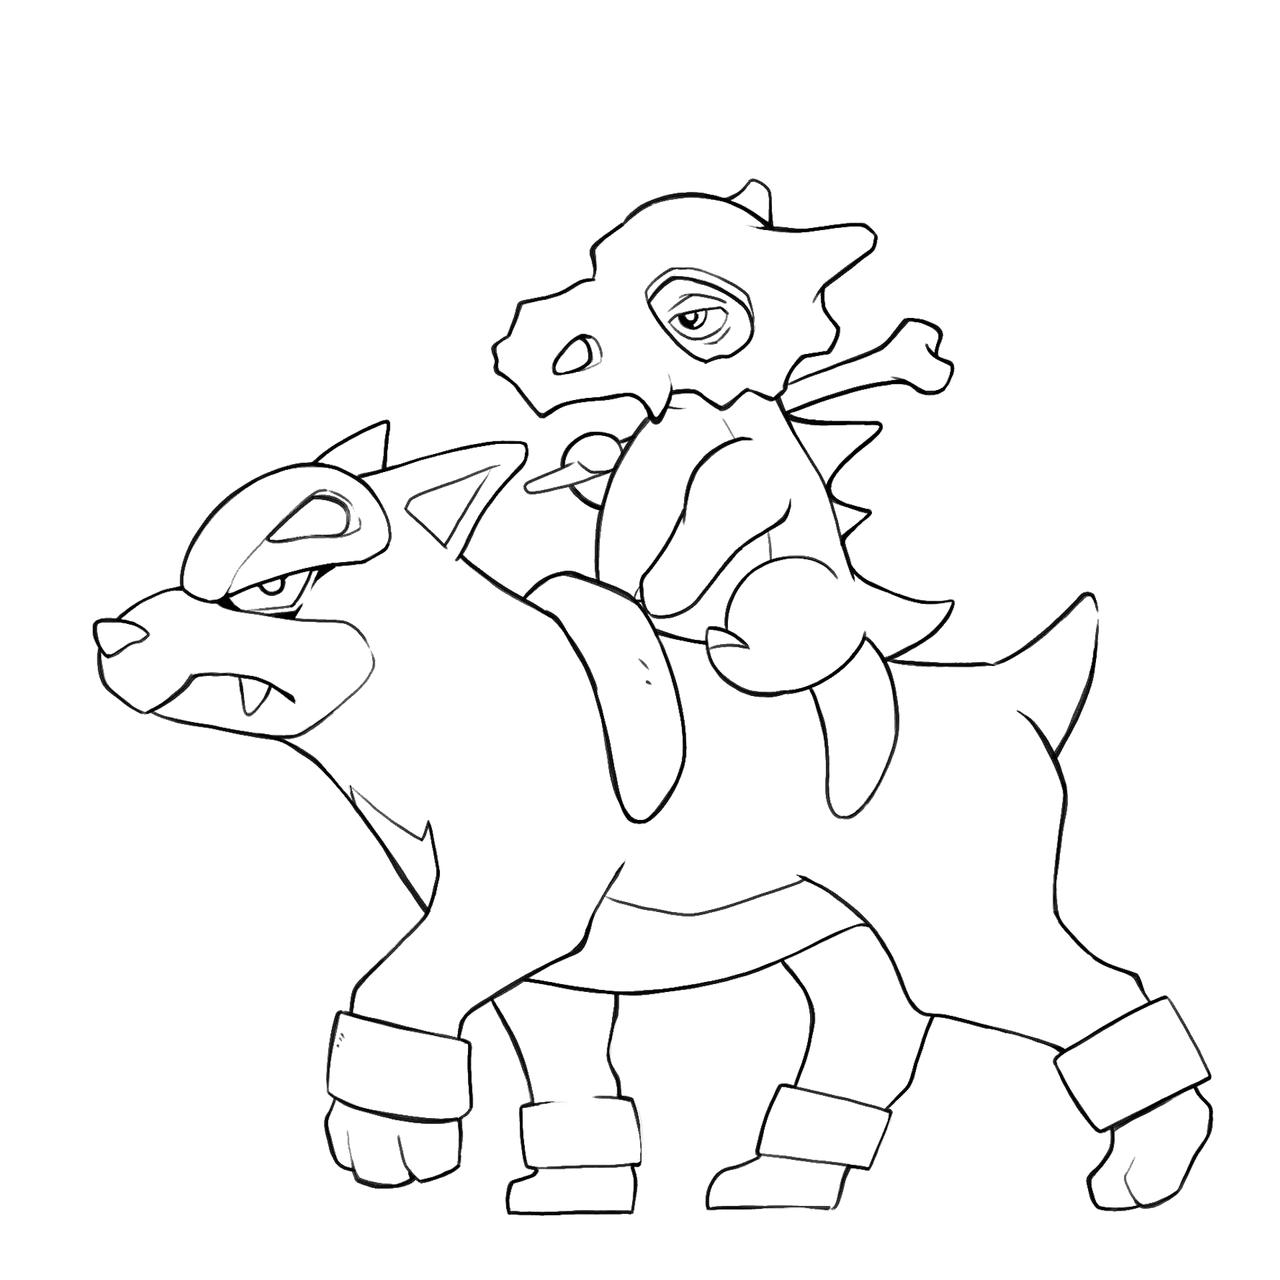 Houndour and cubone coloring page by fancycraftsofficial on